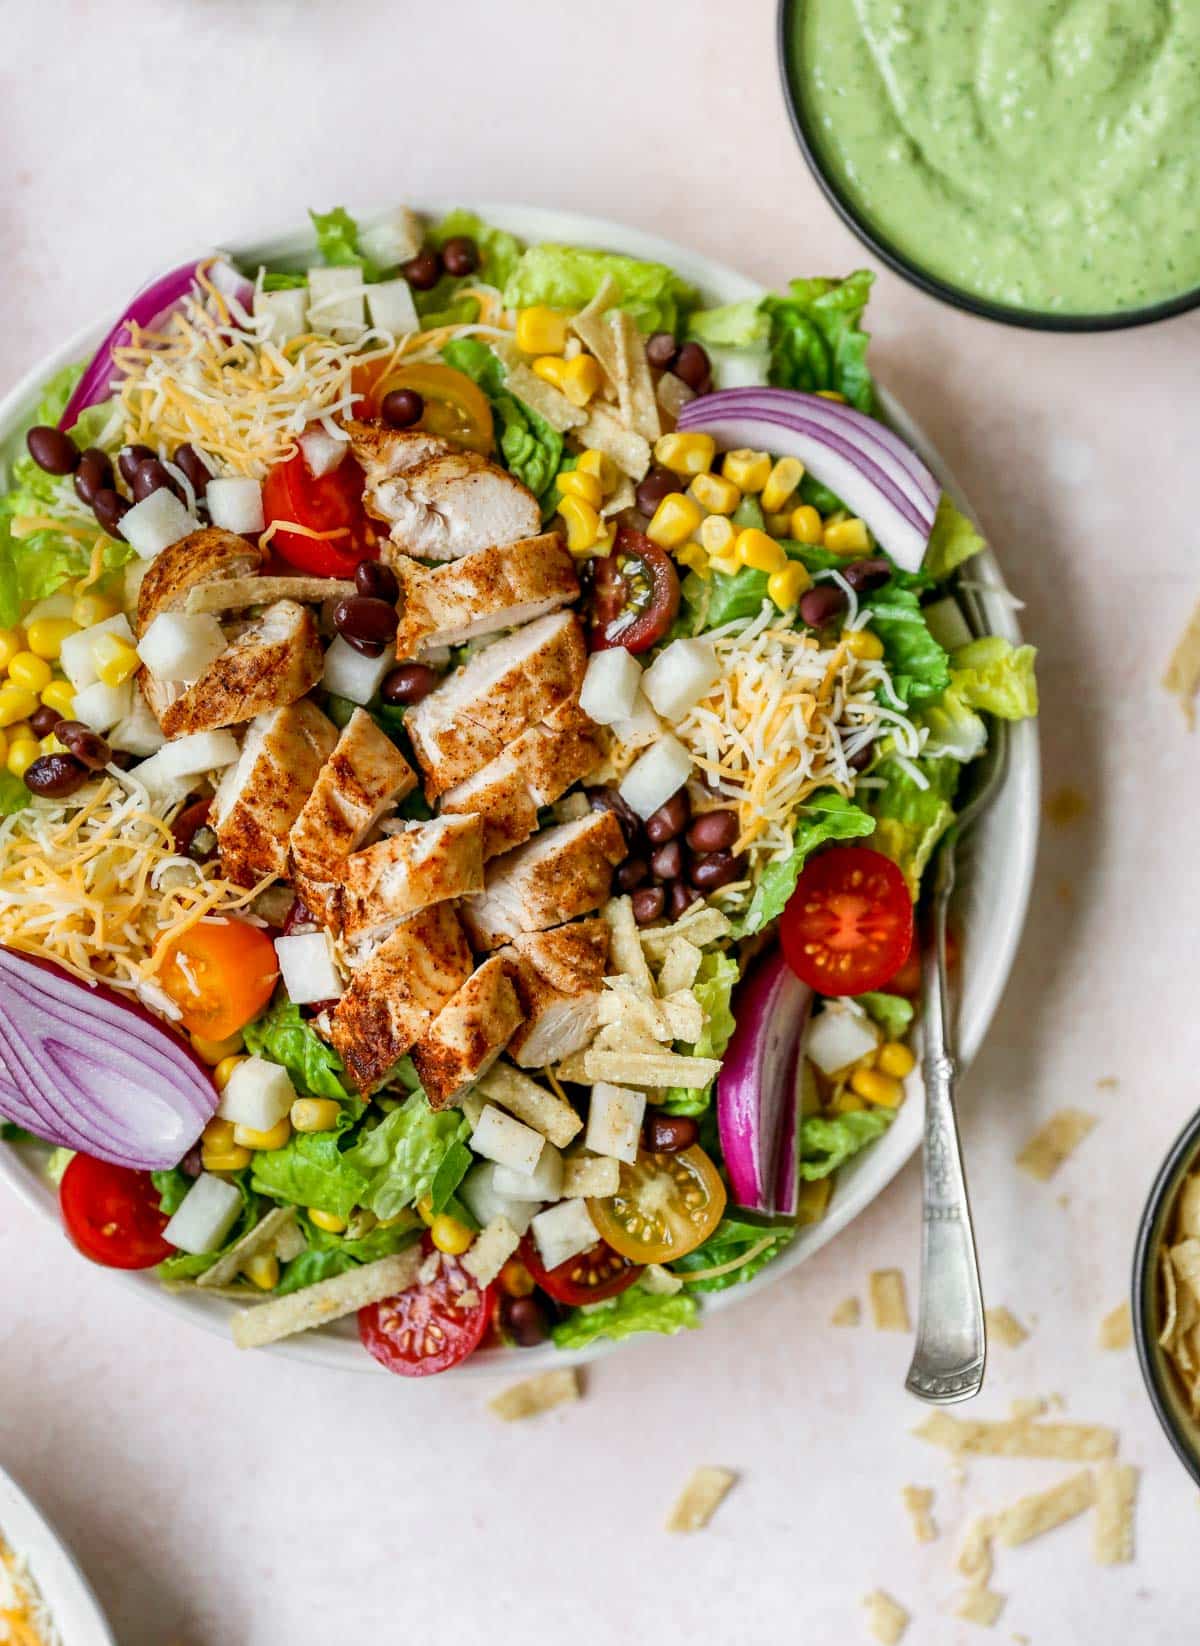 salad with chicken, tomatoes, corn and cheese